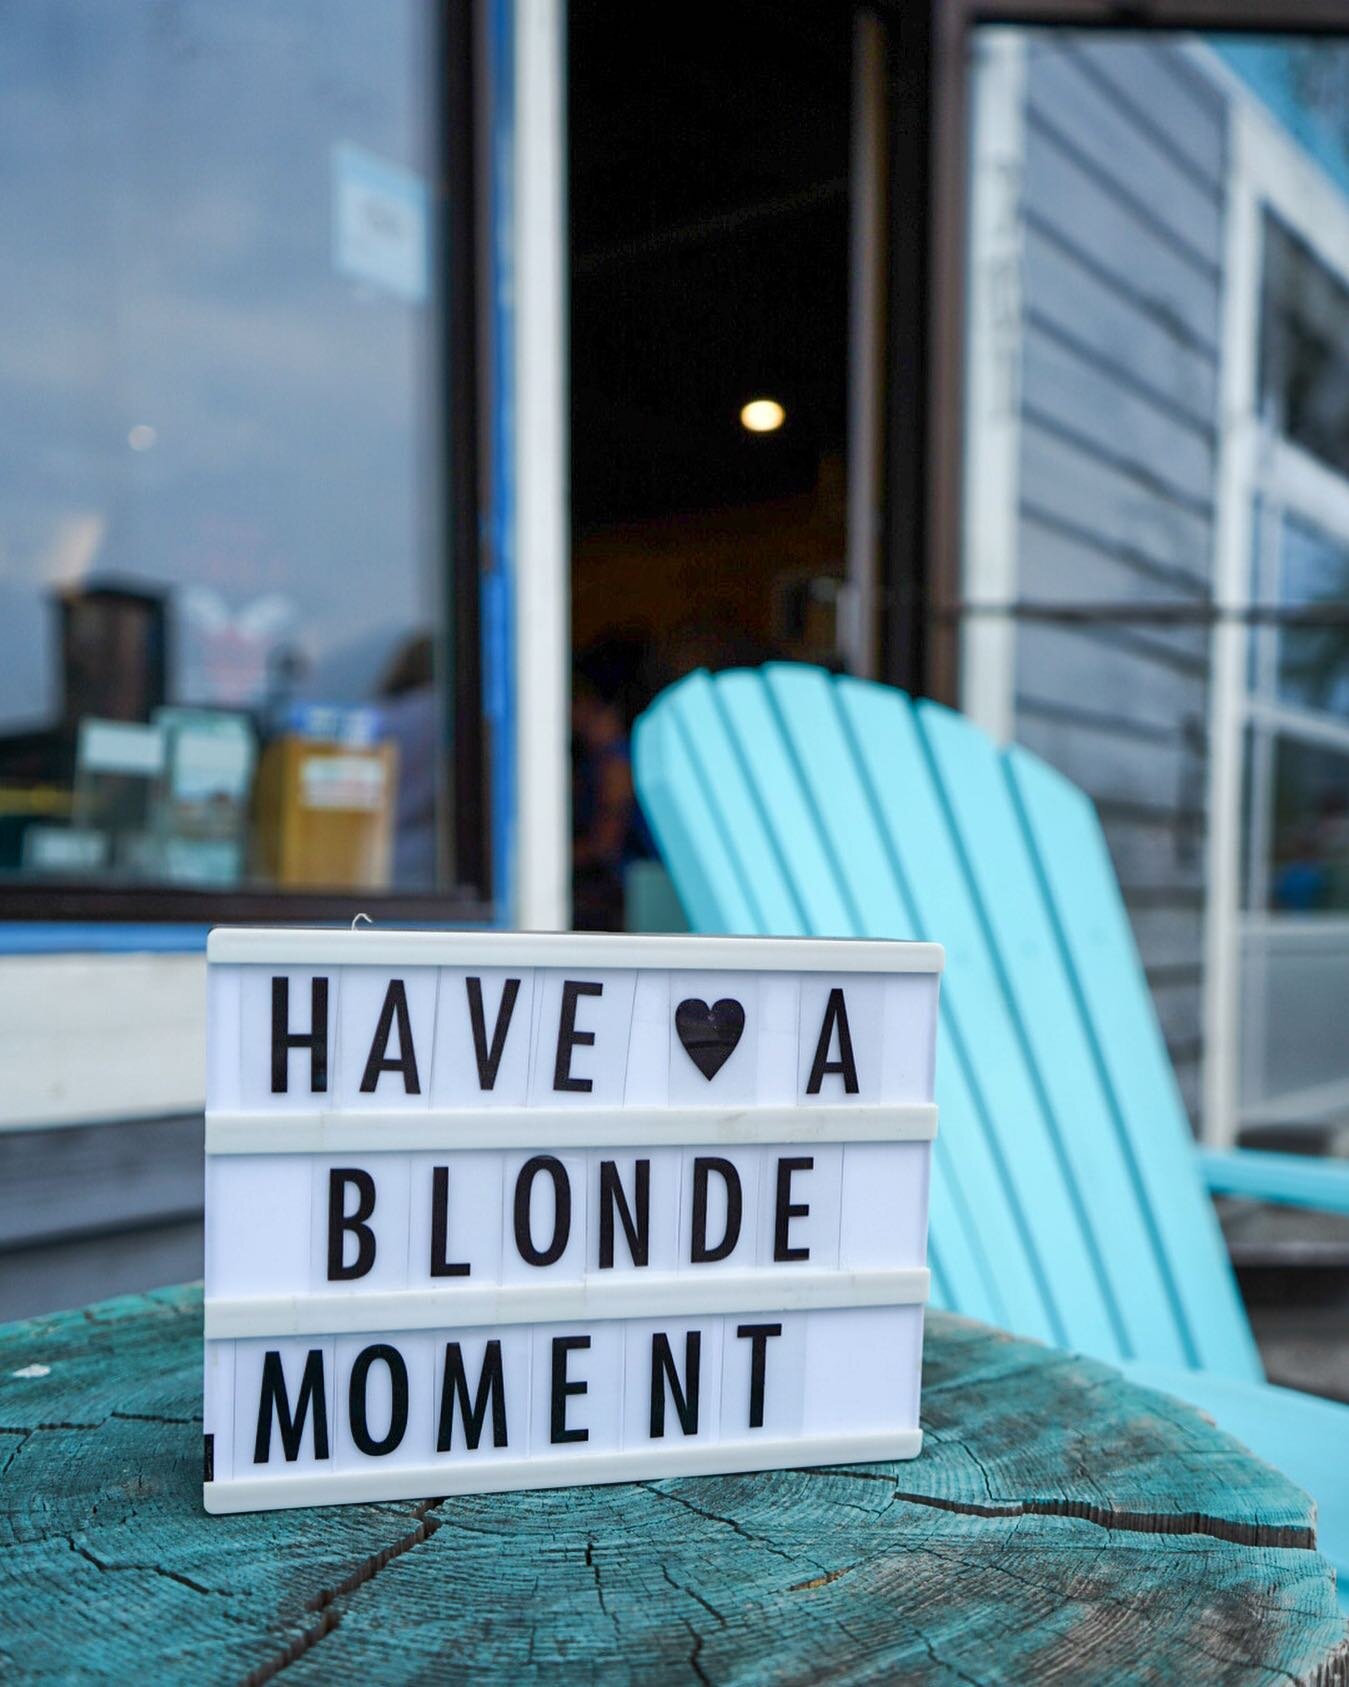 Providing inspiration and motivation one cup at a time 💛#haveablondemoment 
.
.
.
.
#coffee #canmore #sicamous #blondiescafe #latte #cutecafe #locallyowned #downtowncanmore #okanagan